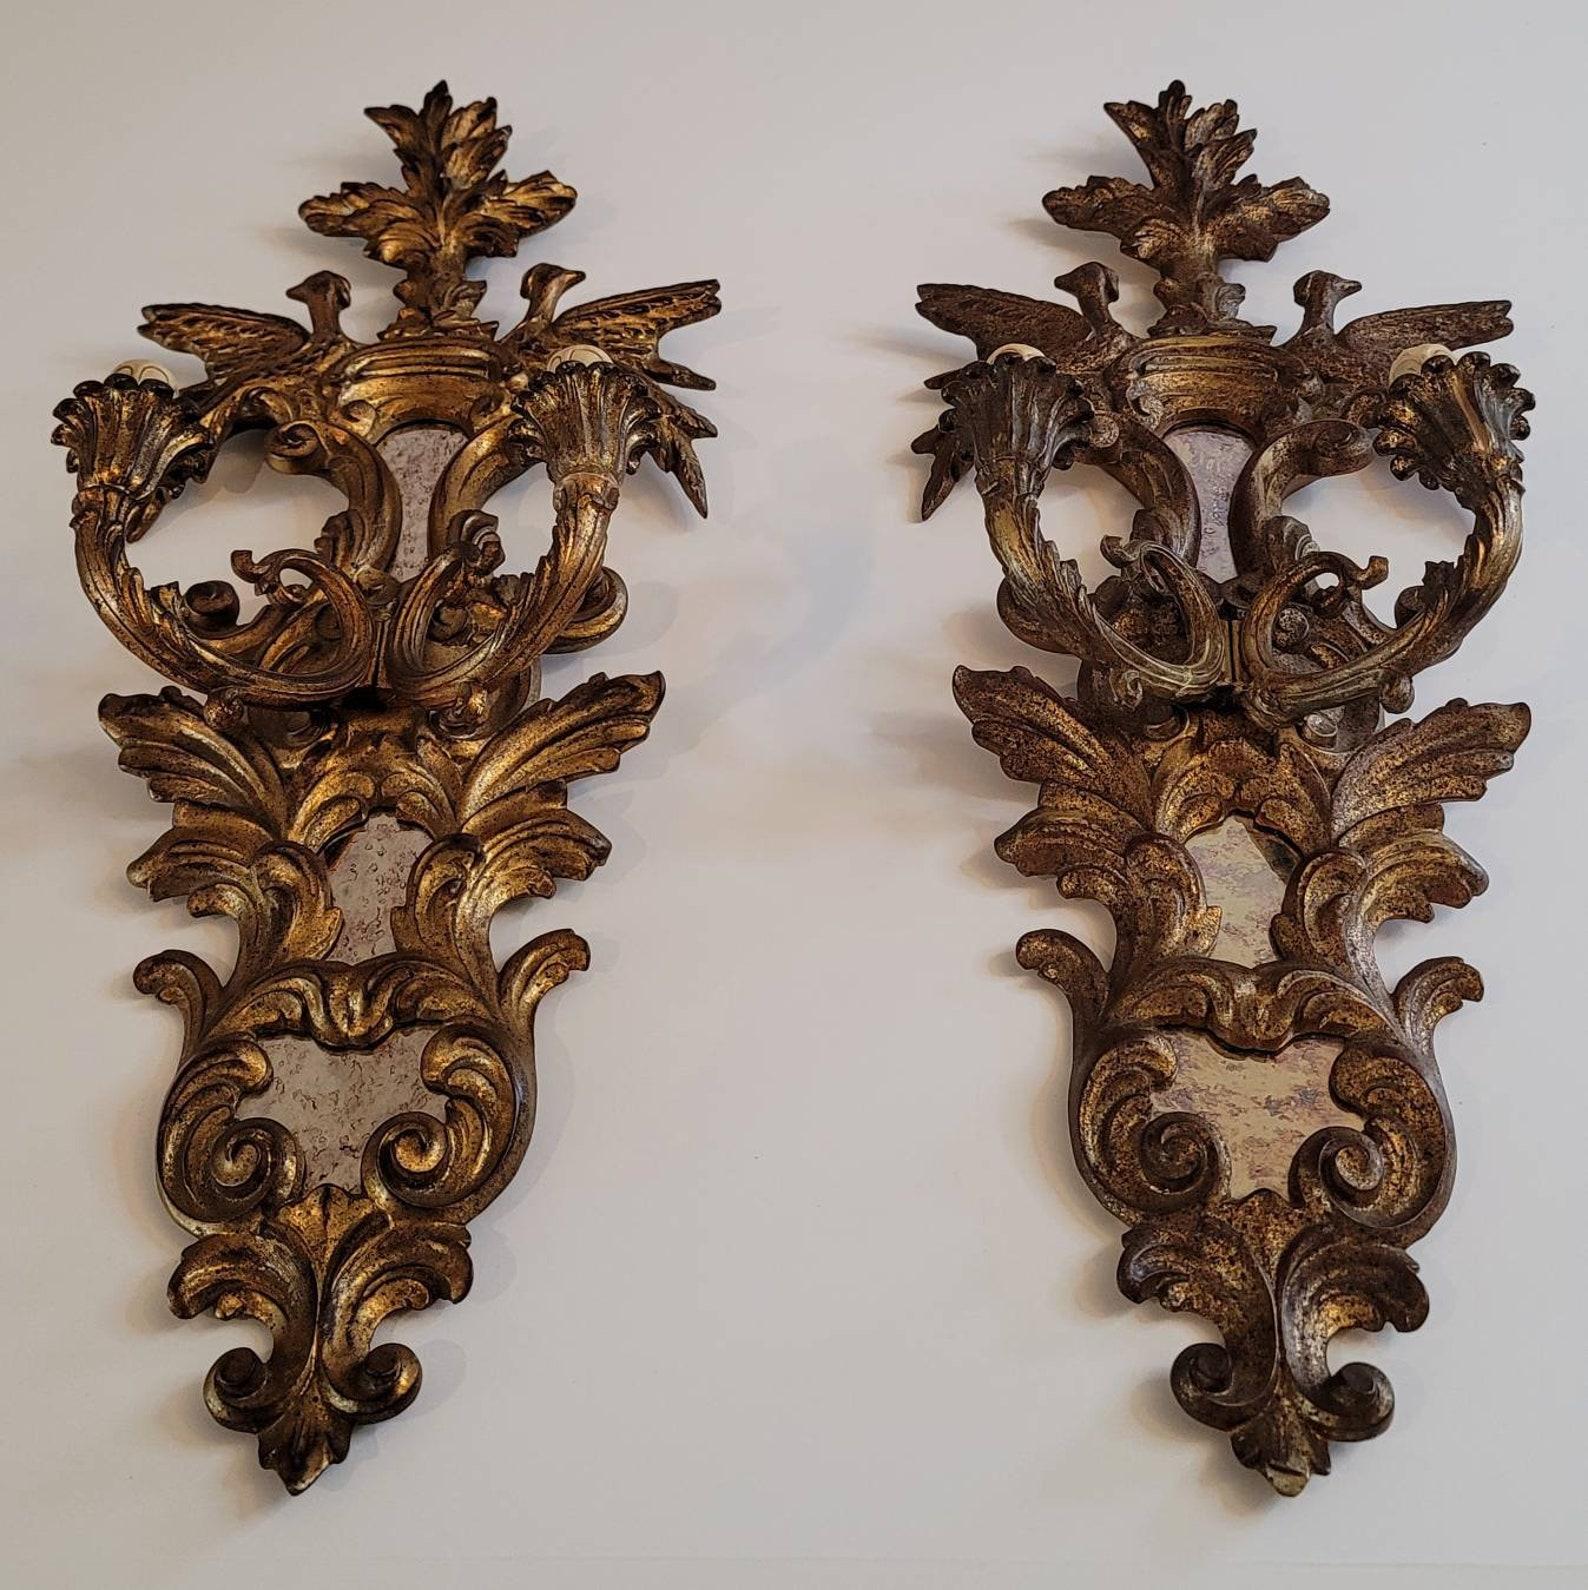 An exceptional pair of elegant French antique, circa 1880, hand carved and gilded two light wall sconces with beautiful patina. 

Born in France in the late 19th century, exquisitely crafted in classical Louis XVI style, originally designed for